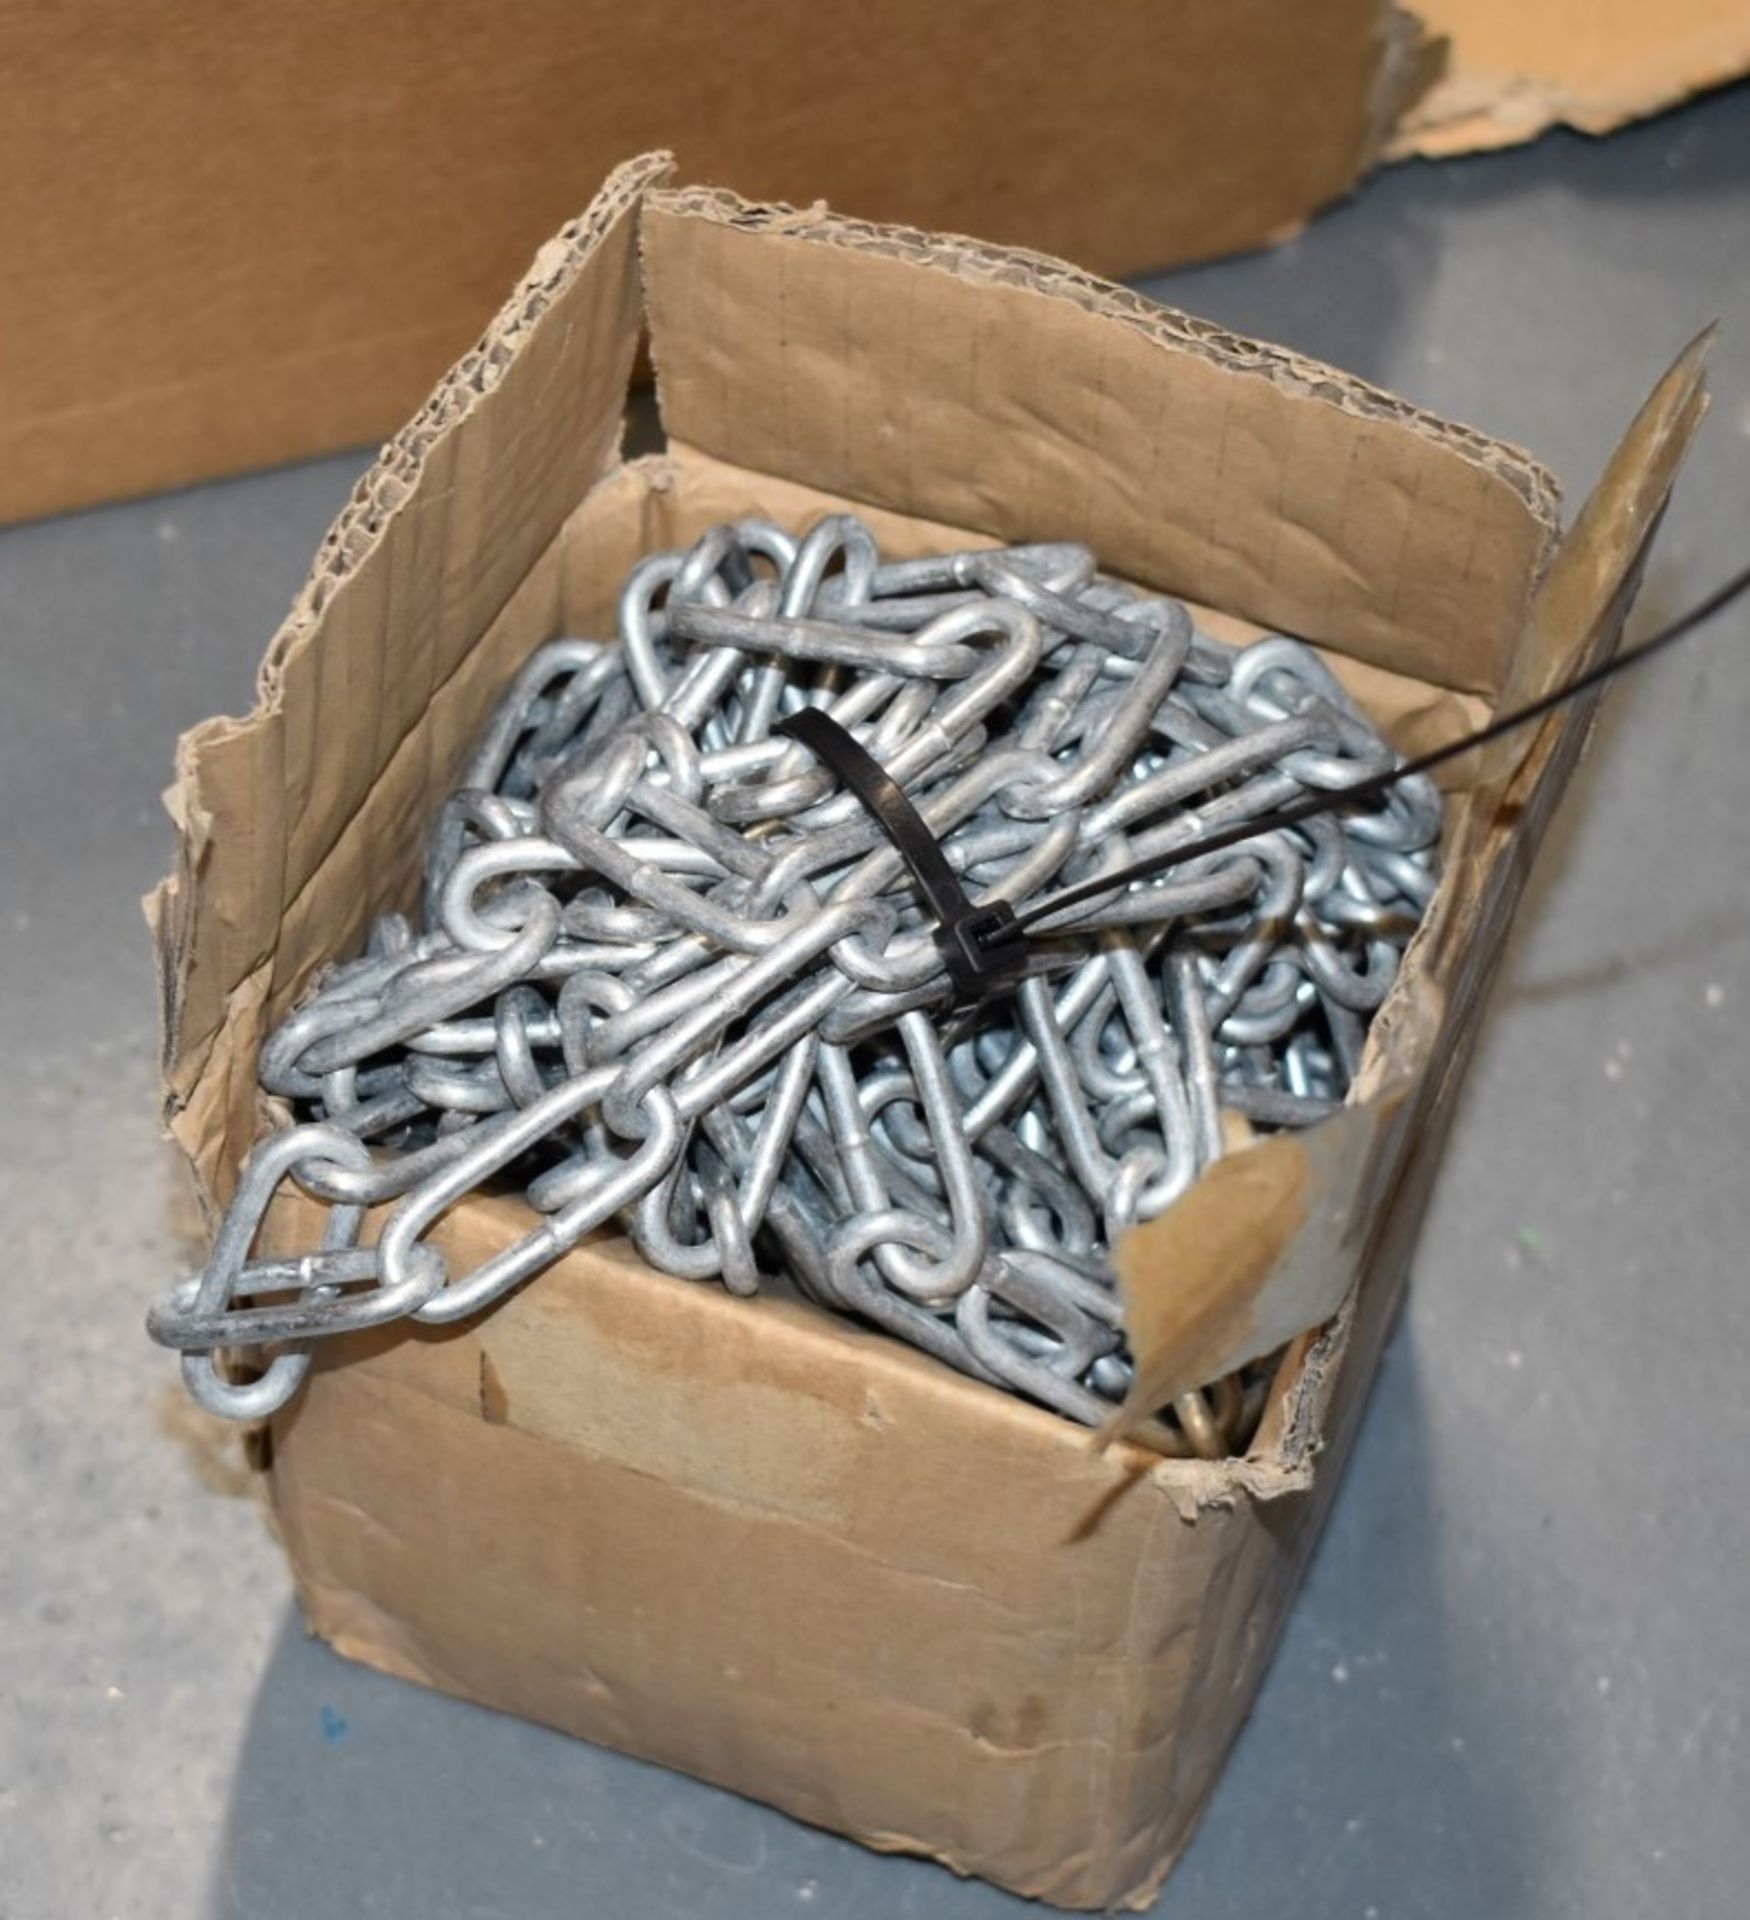 1 x Assorted Lot of Link Chain - Includes 175' Link Chain Reel, 20 Bags of Chain and Box of Chain - Image 7 of 9